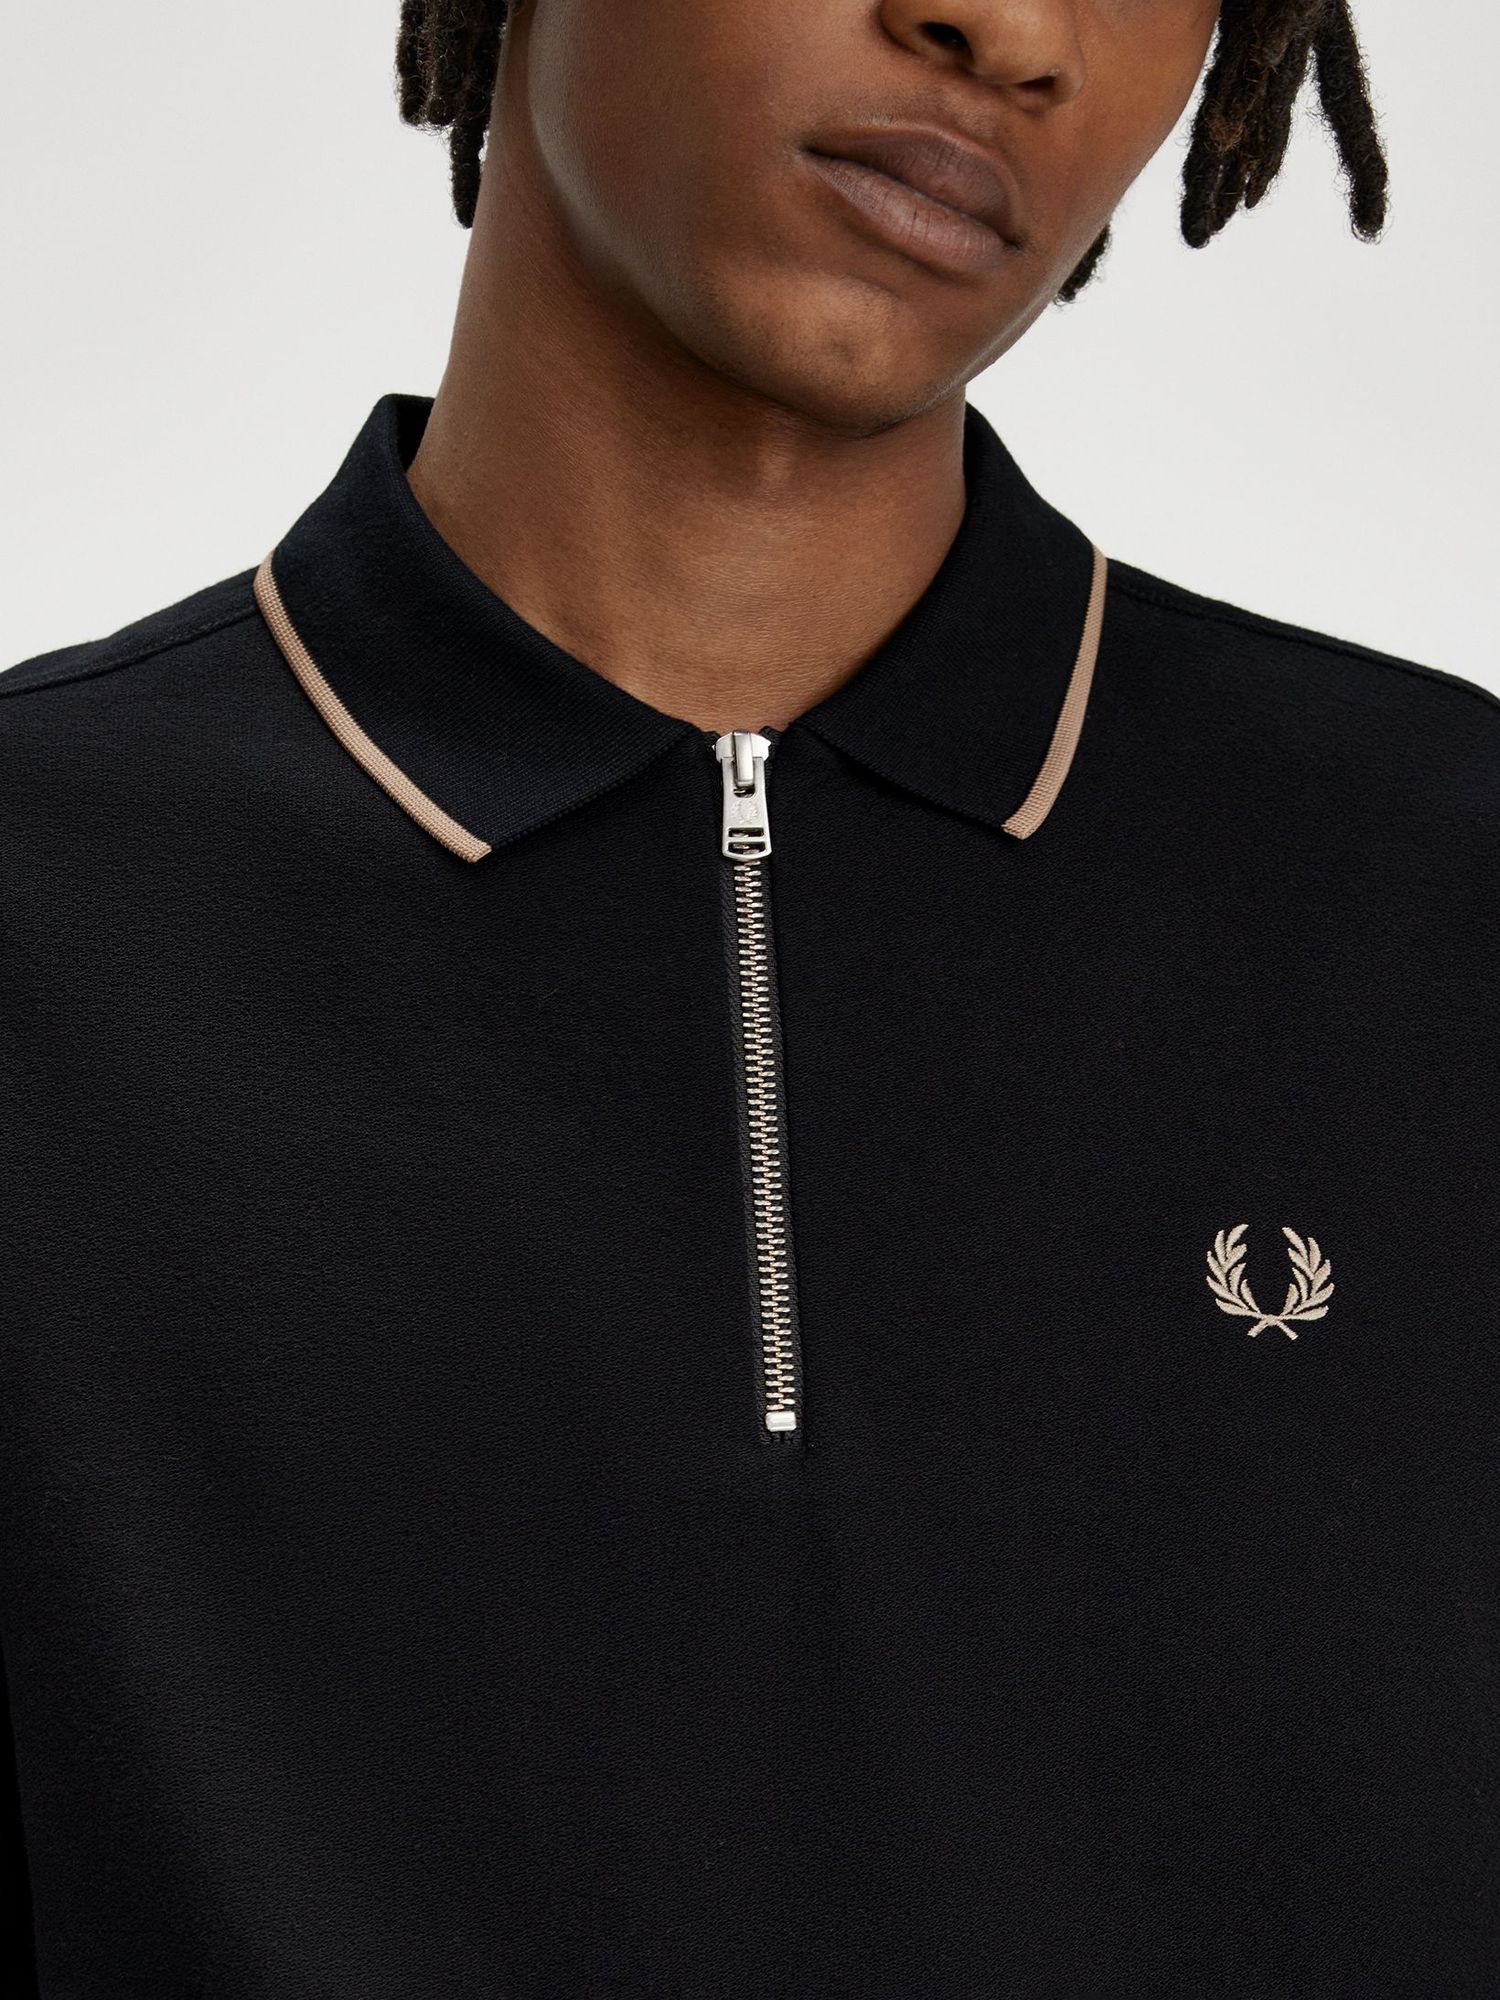 Buy Fred Perry Cotton Crepe Piqué Polo Shirt, Black Online at johnlewis.com